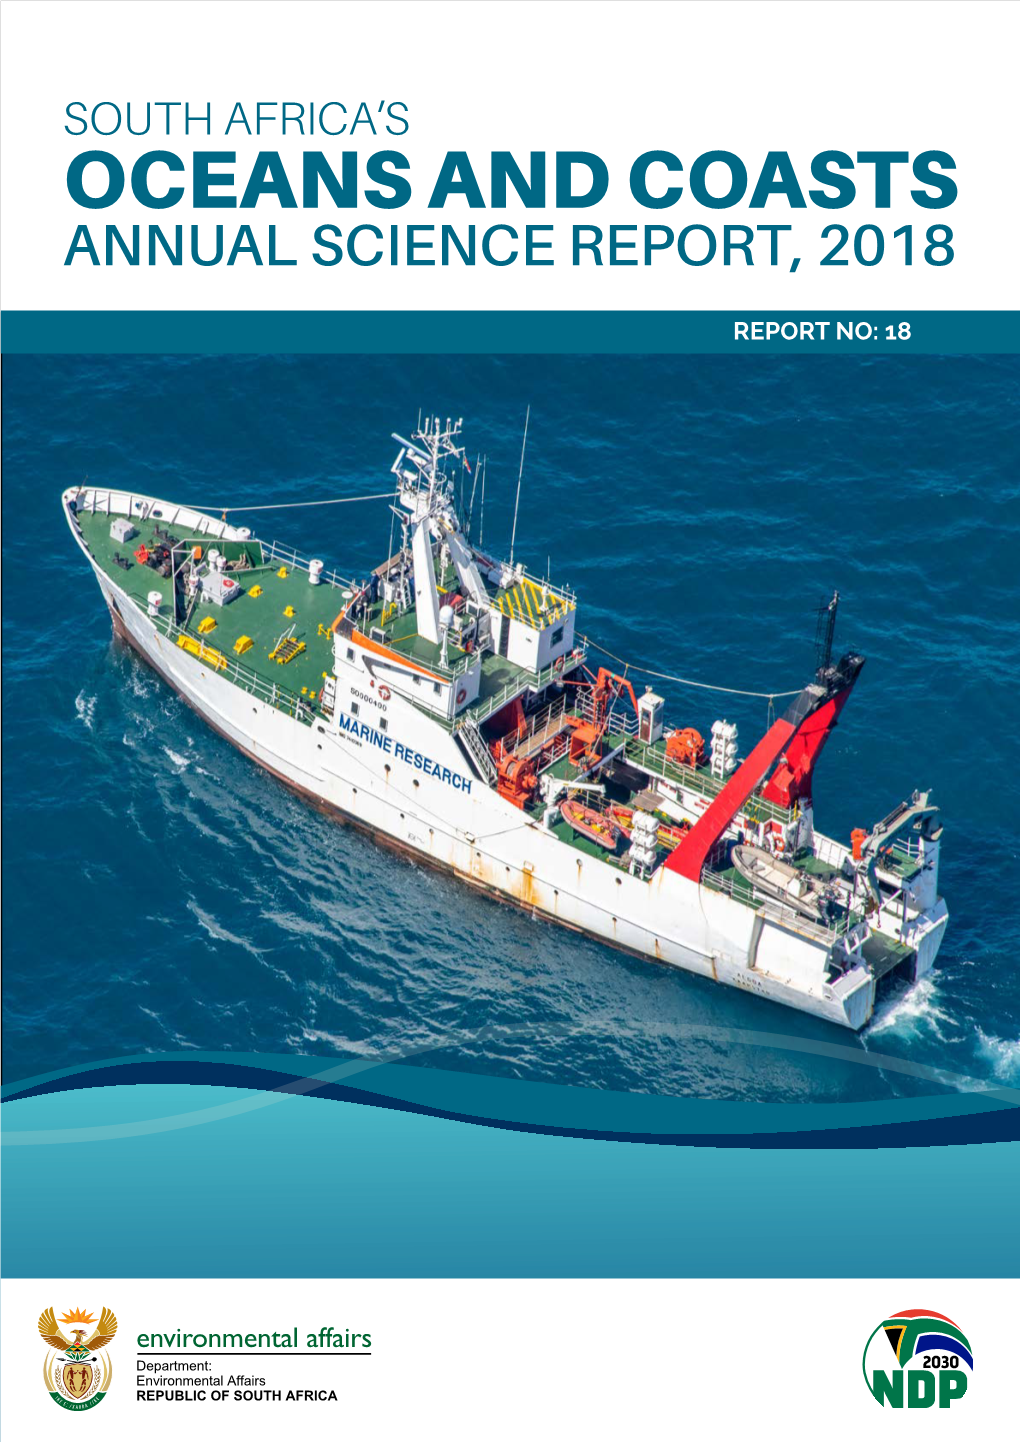 Oceans and Coasts Annual Science Report, 2018